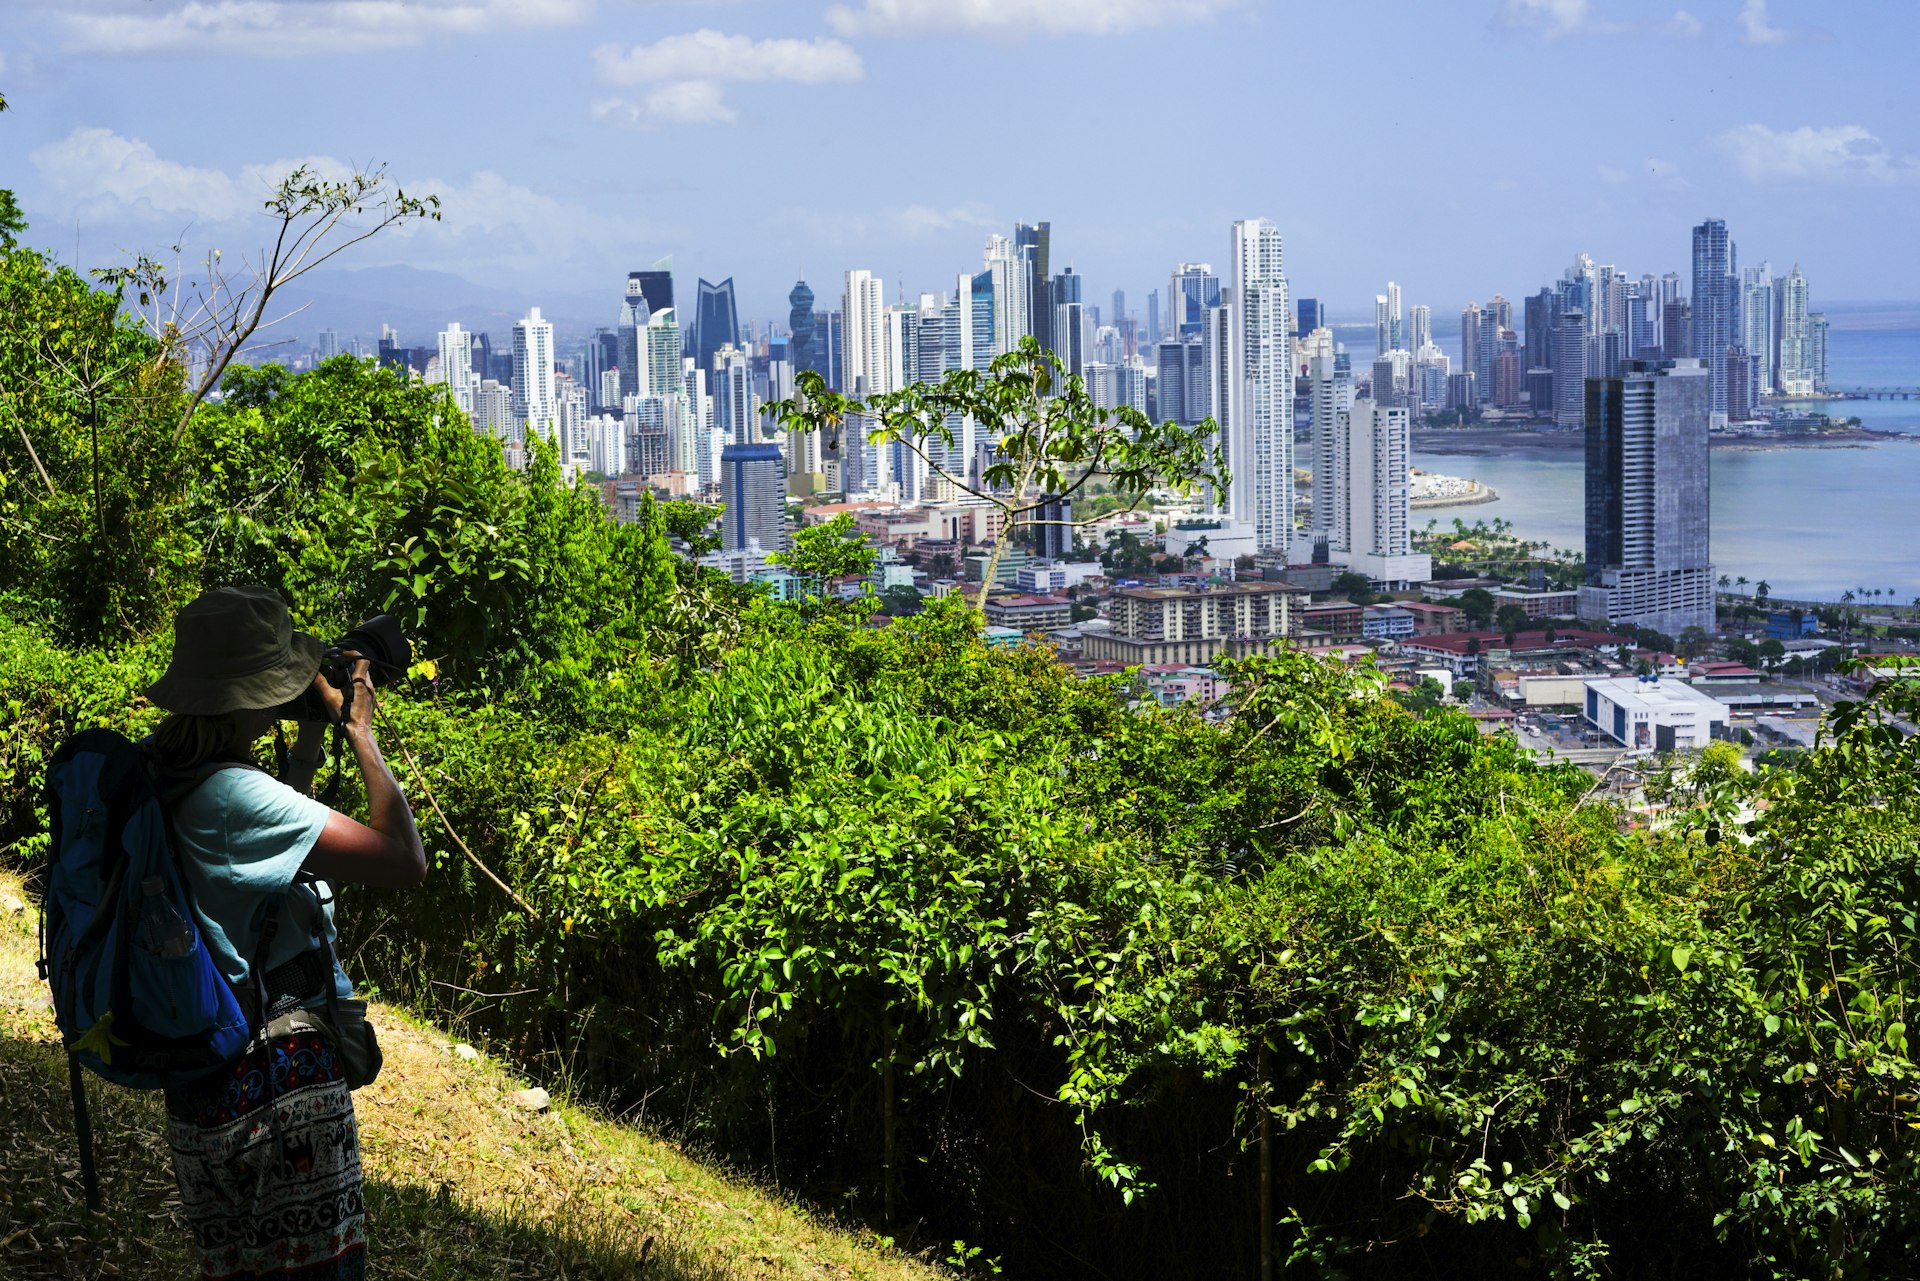 A woman takes a photo of the city skyline viewed from within dense foliage